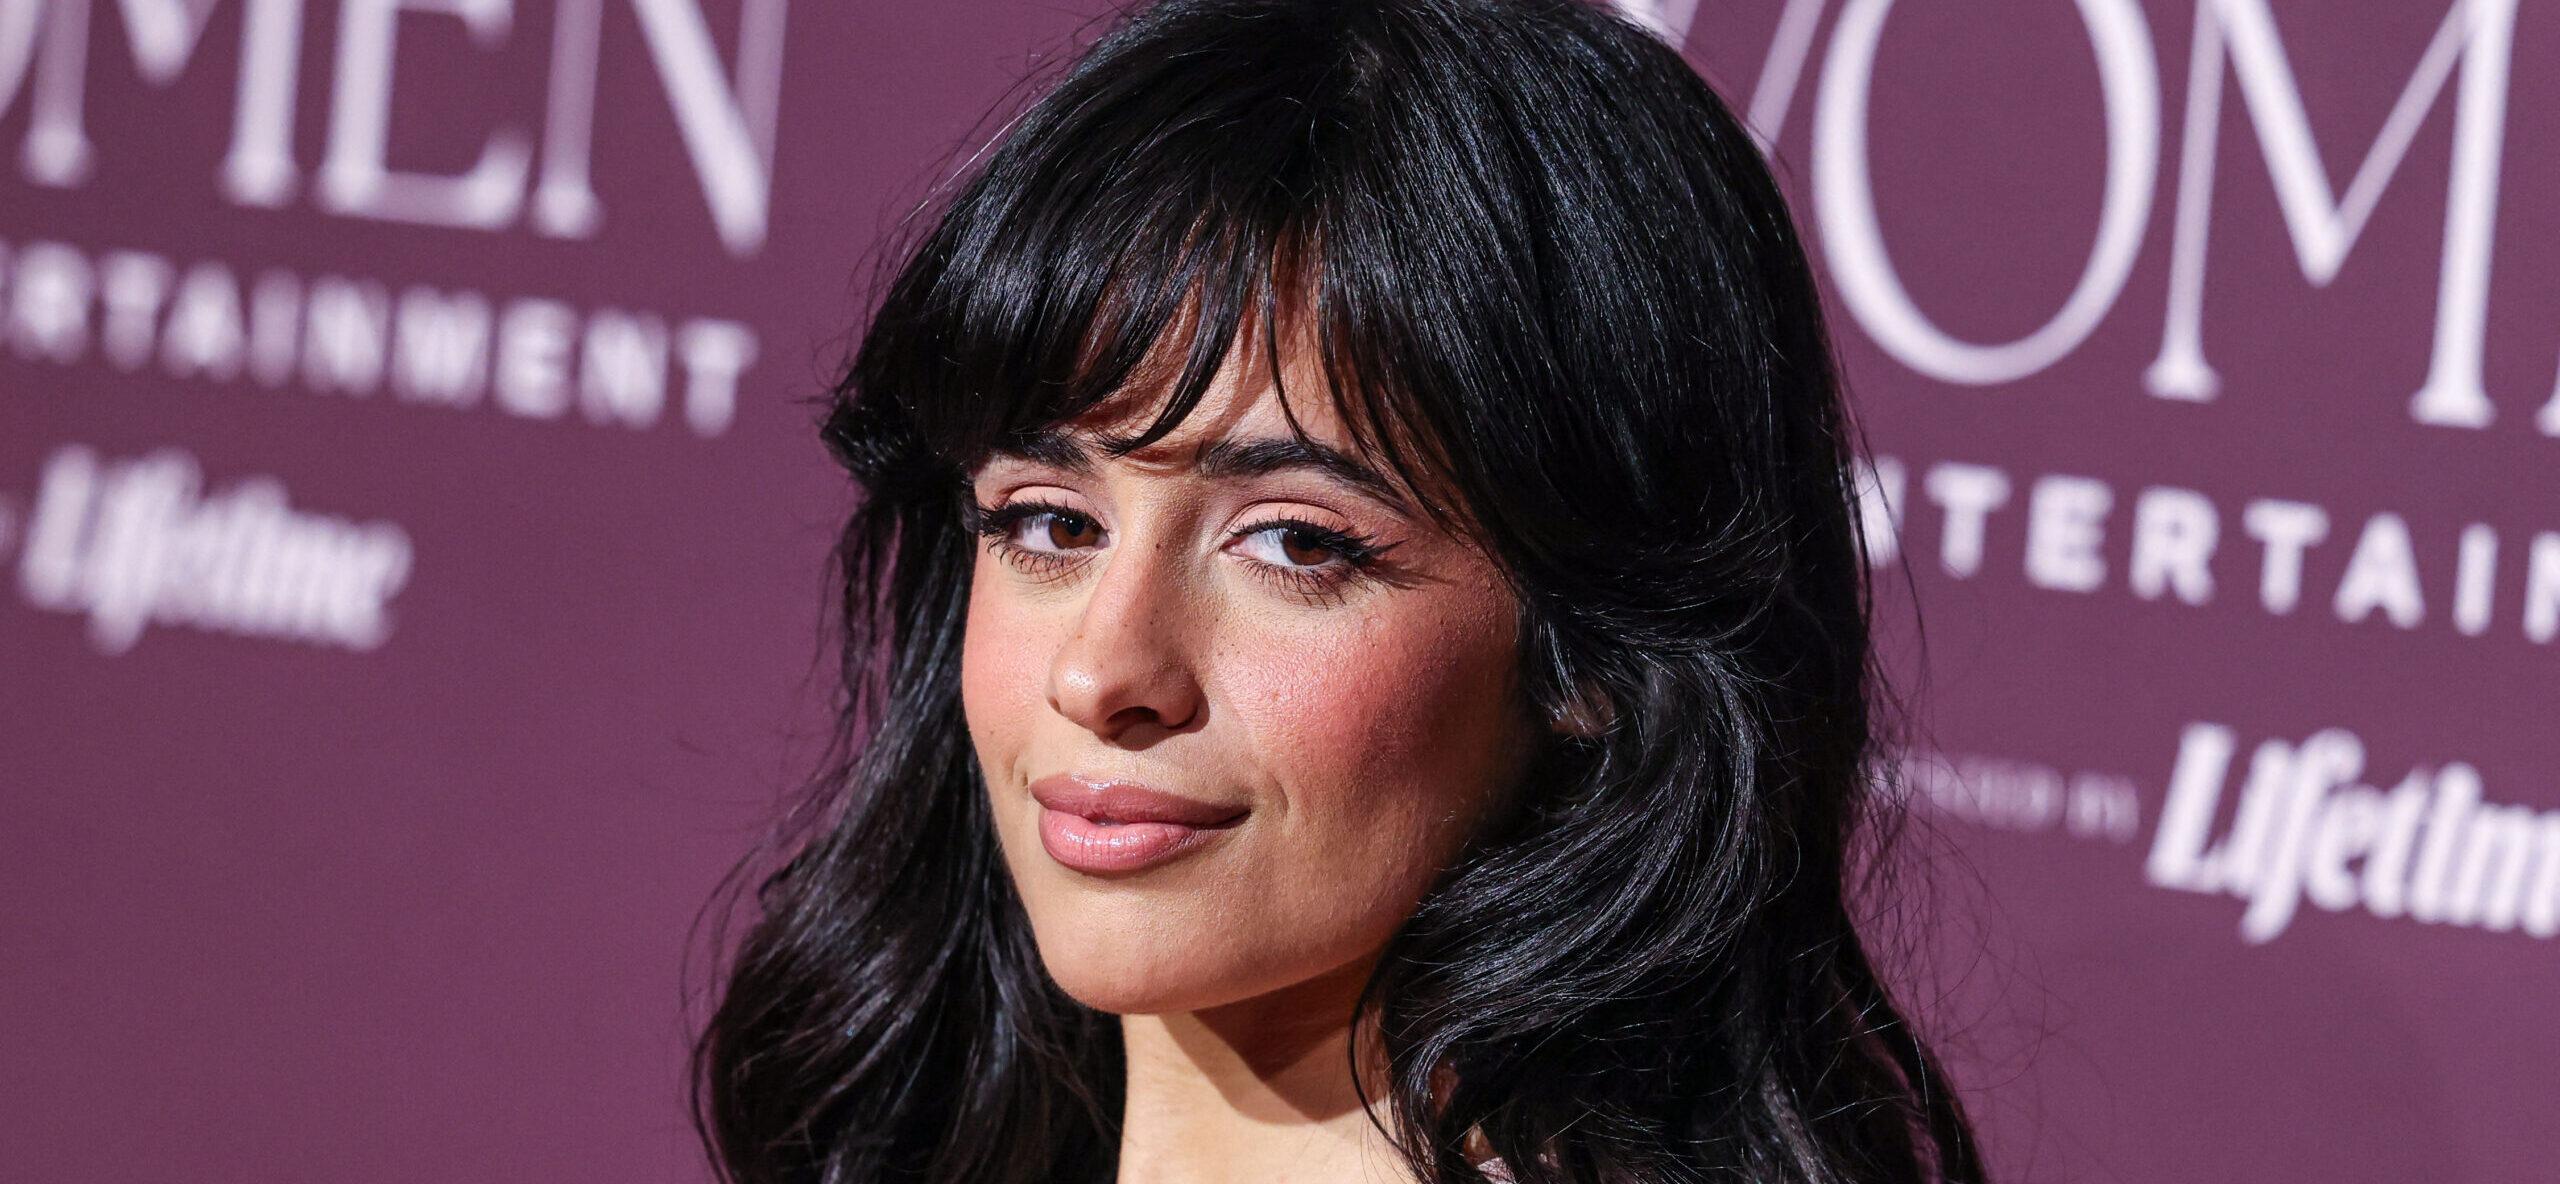 BEVERLY HILLS, LOS ANGELES, CALIFORNIA, USA - DECEMBER 07: The Hollywood Reporter's Women In Entertainment Gala 2023 held at The Beverly Hills Hotel on December 7, 2023 in Beverly Hills, Los Angeles, California, United States. 07 Dec 2023 Pictured: Camila Cabello. Photo credit: Xavier Collin/Image Press Agency/MEGA TheMegaAgency.com +1 888 505 6342 (Mega Agency TagID: MEGA1069387_033.jpg) [Photo via Mega Agency]